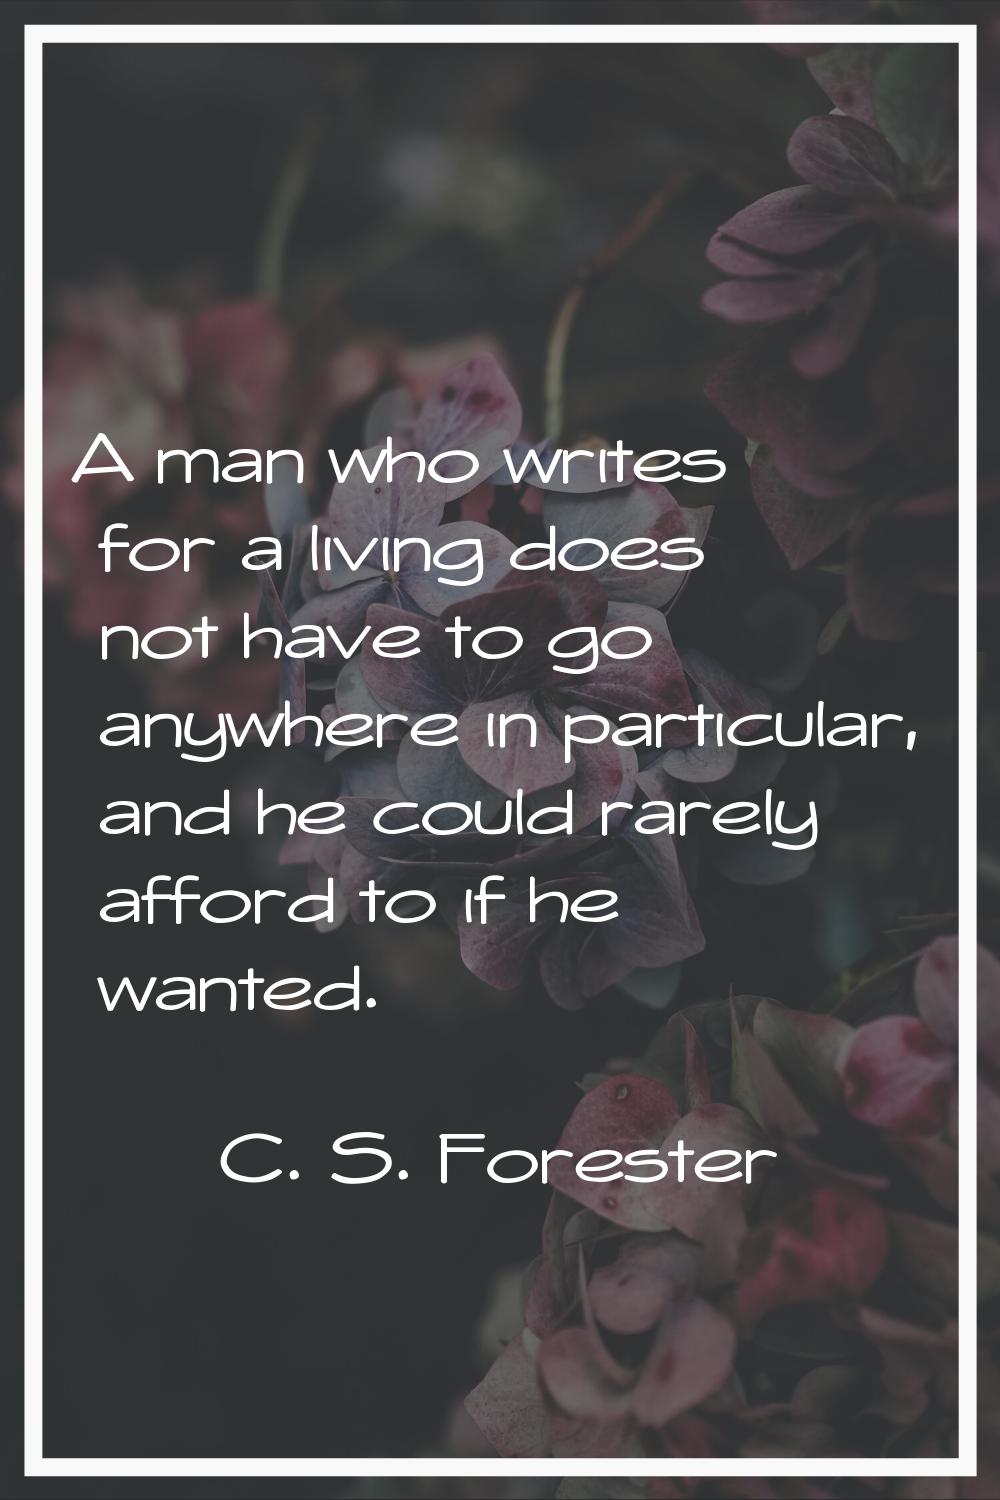 A man who writes for a living does not have to go anywhere in particular, and he could rarely affor